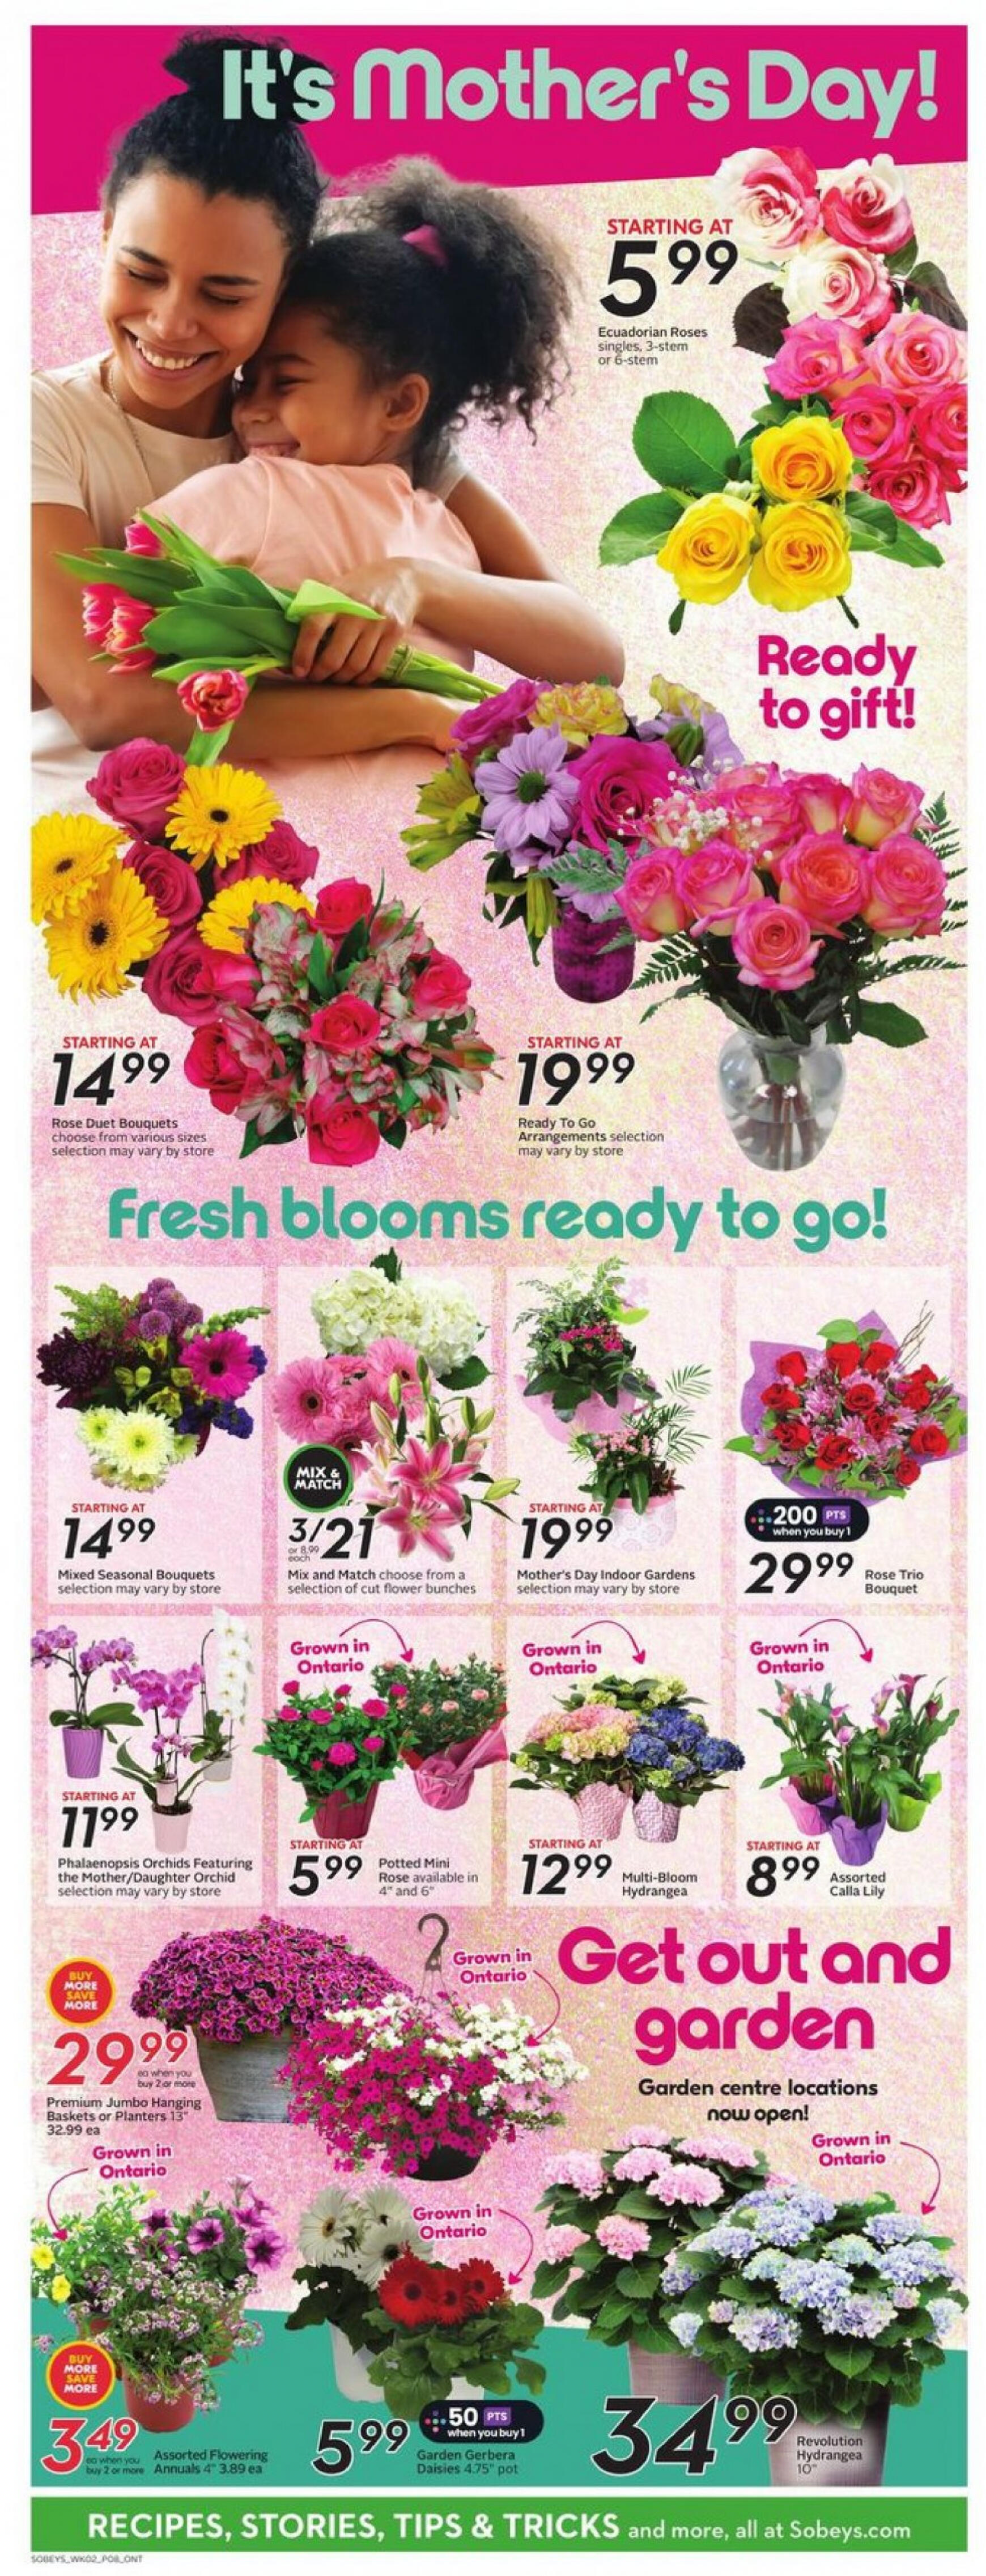 sobeys - Sobeys - Weekly Flyer - Ontario flyer current 09.05. - 15.05. - page: 14